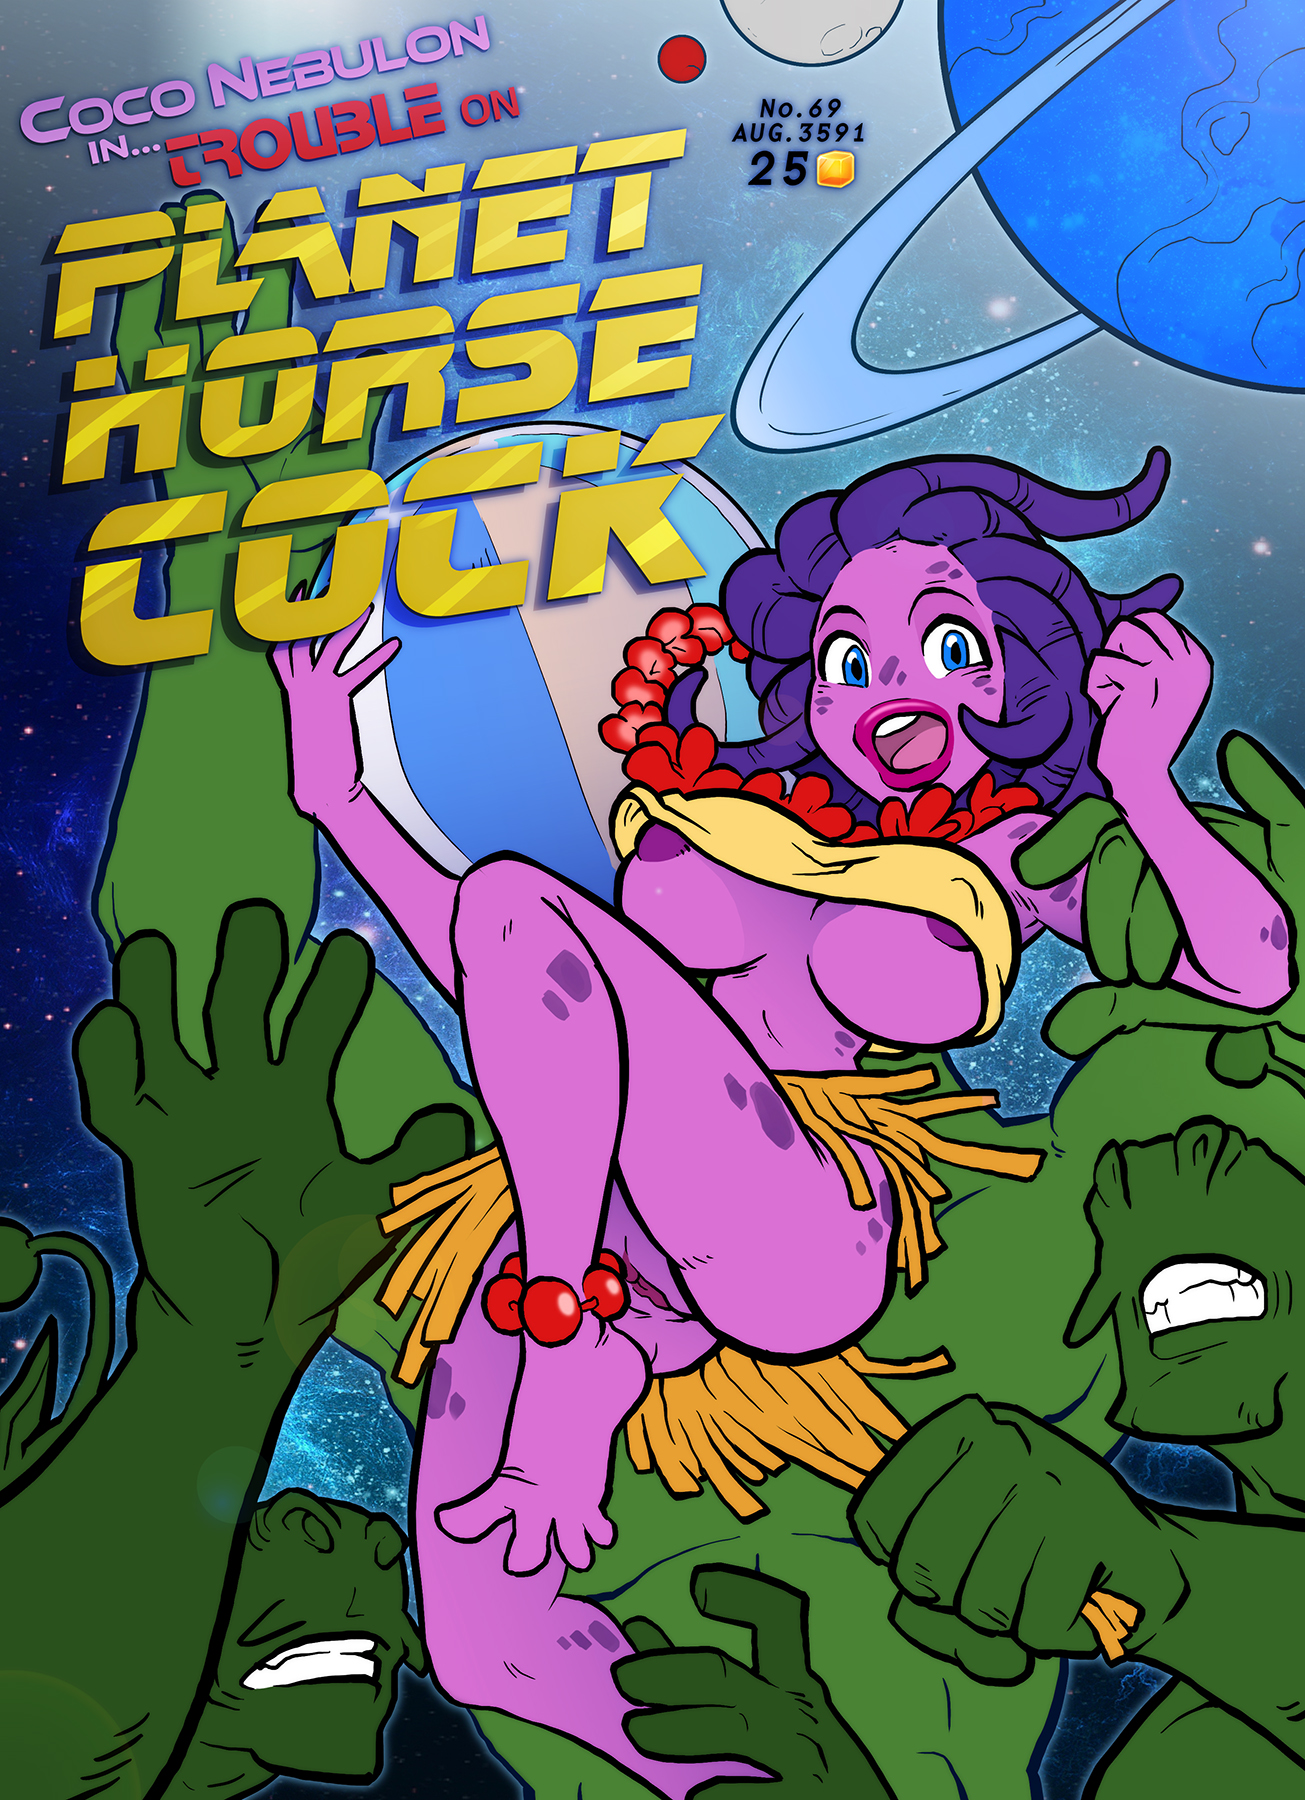 Updated sexy alien girl in Sparrow - Coco Nebulon in Trouble On Planet Horse Cock